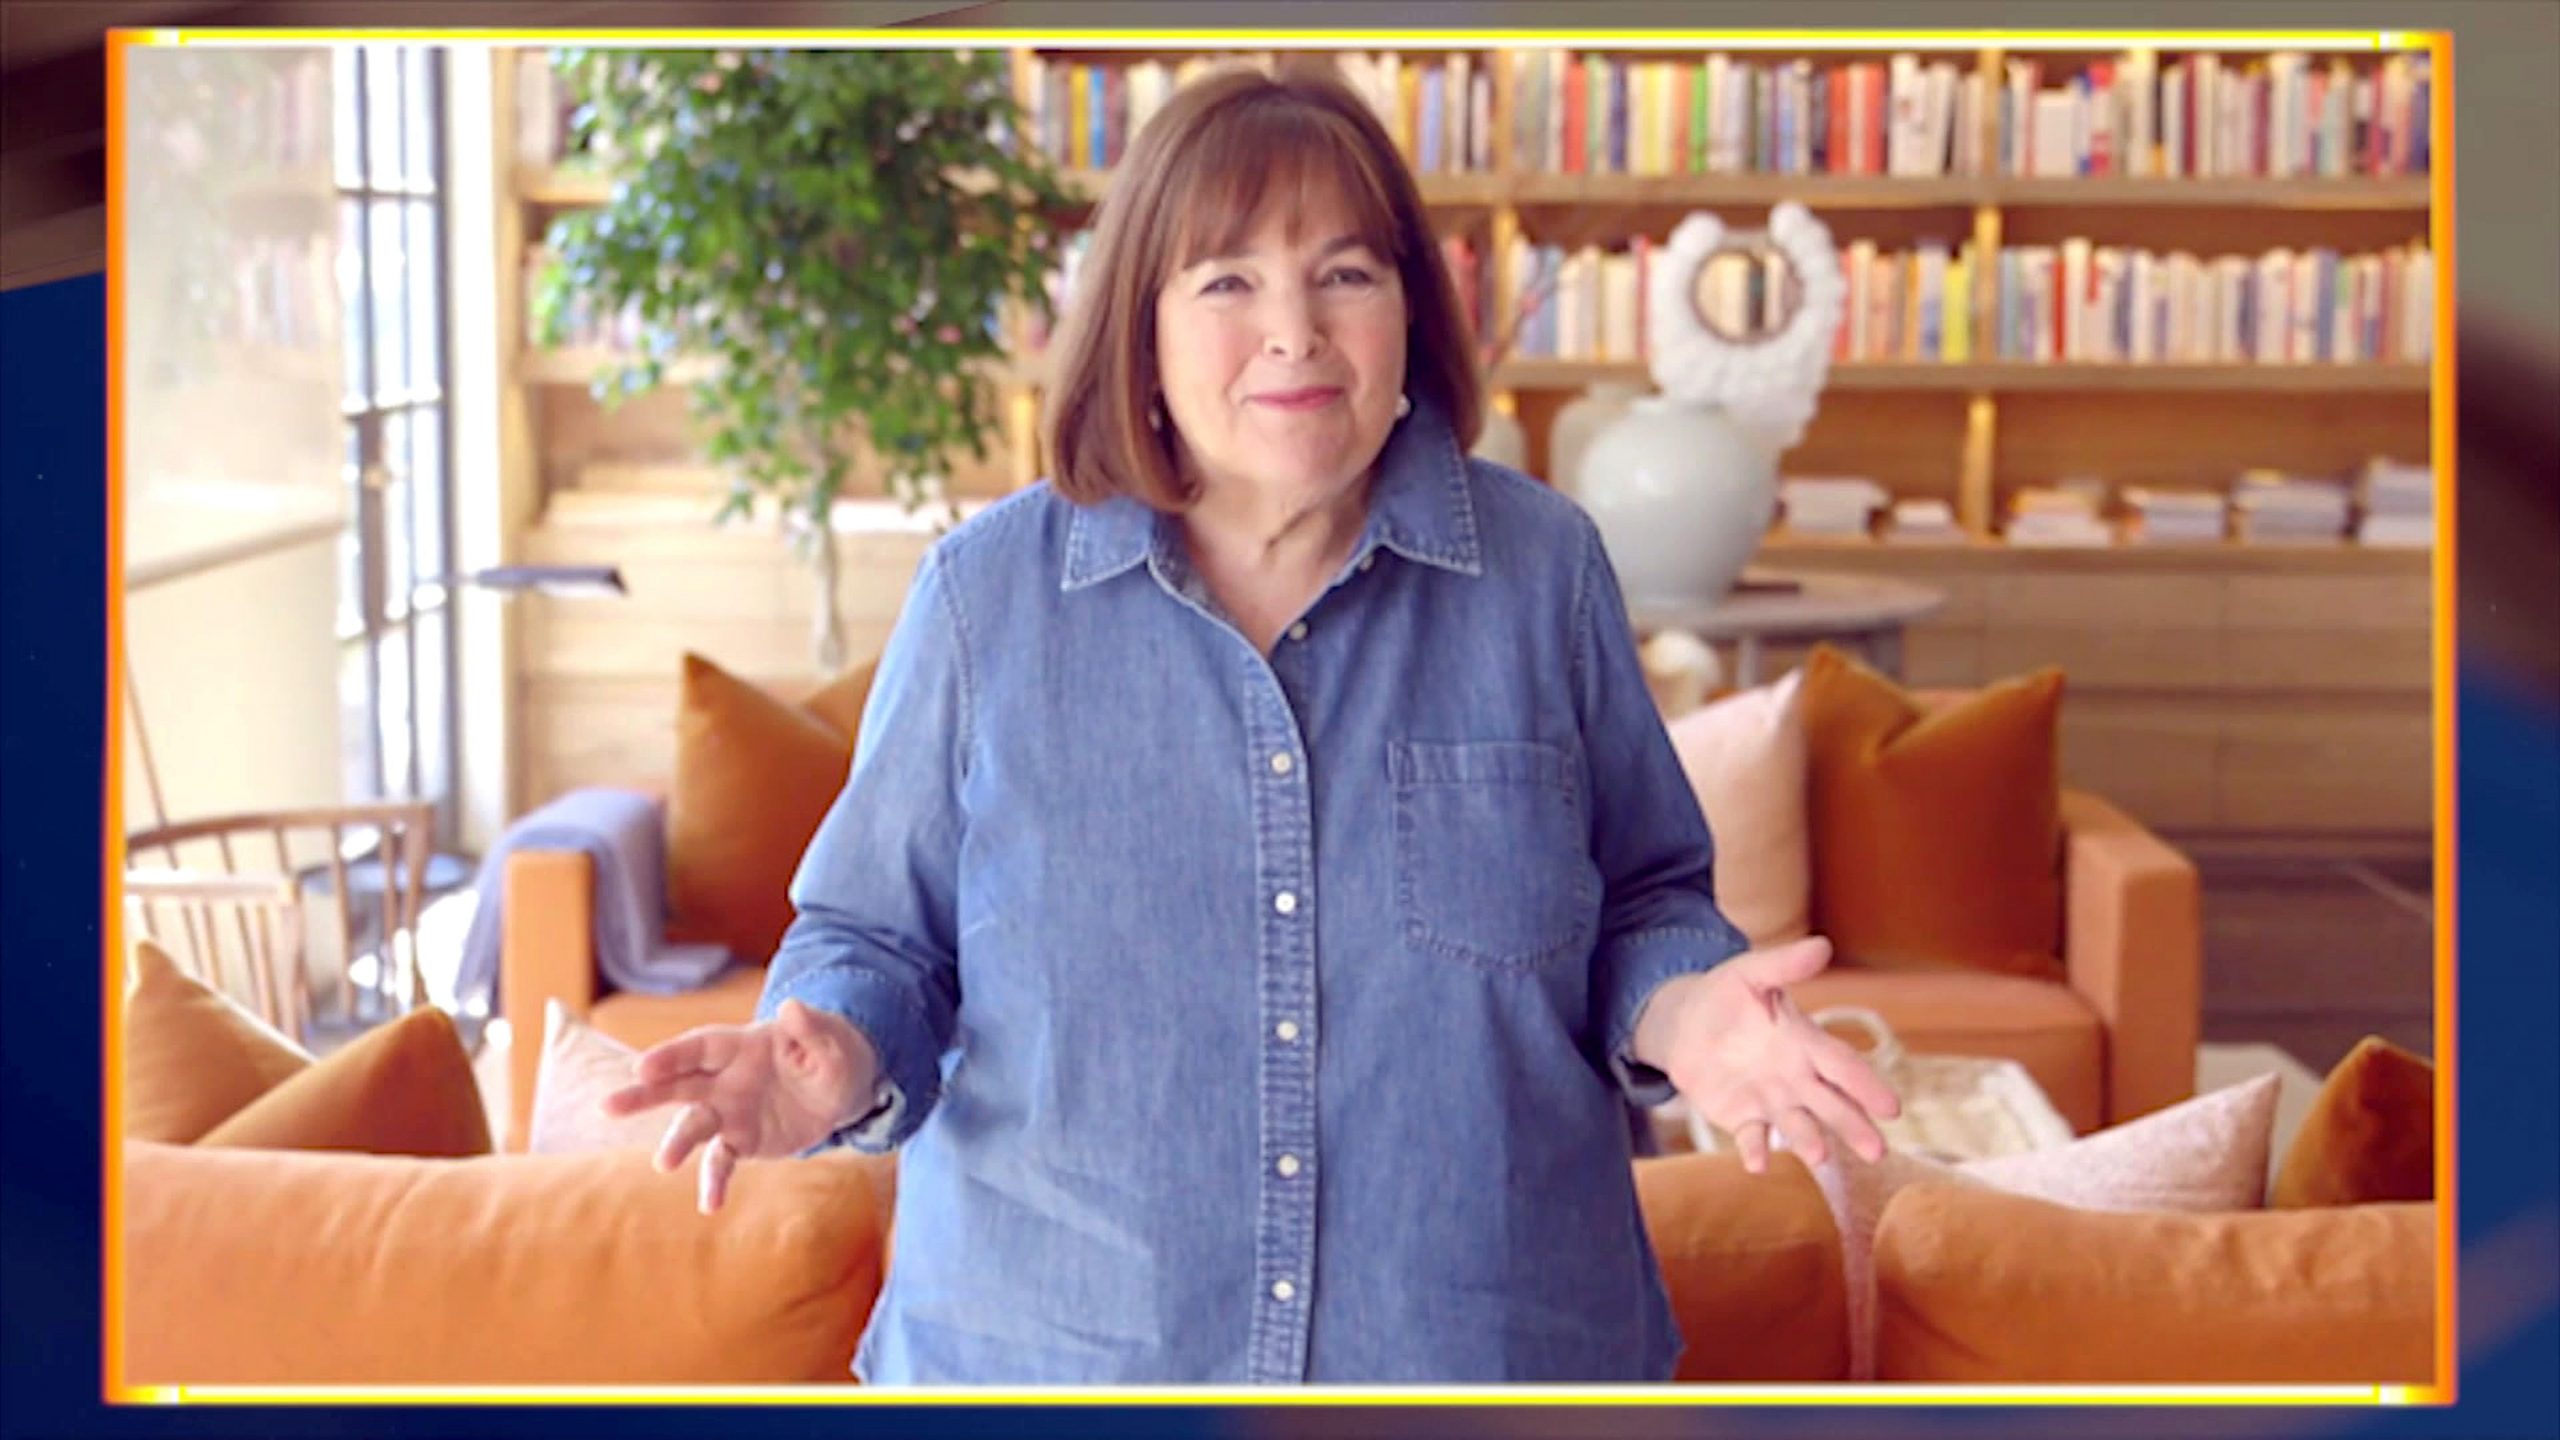 Food Network's 'Barefoot Contessa' star Ina Garten remotely accepts a Daytime Emmy Award in 2021 for her program, 'Cook Like a Pro'